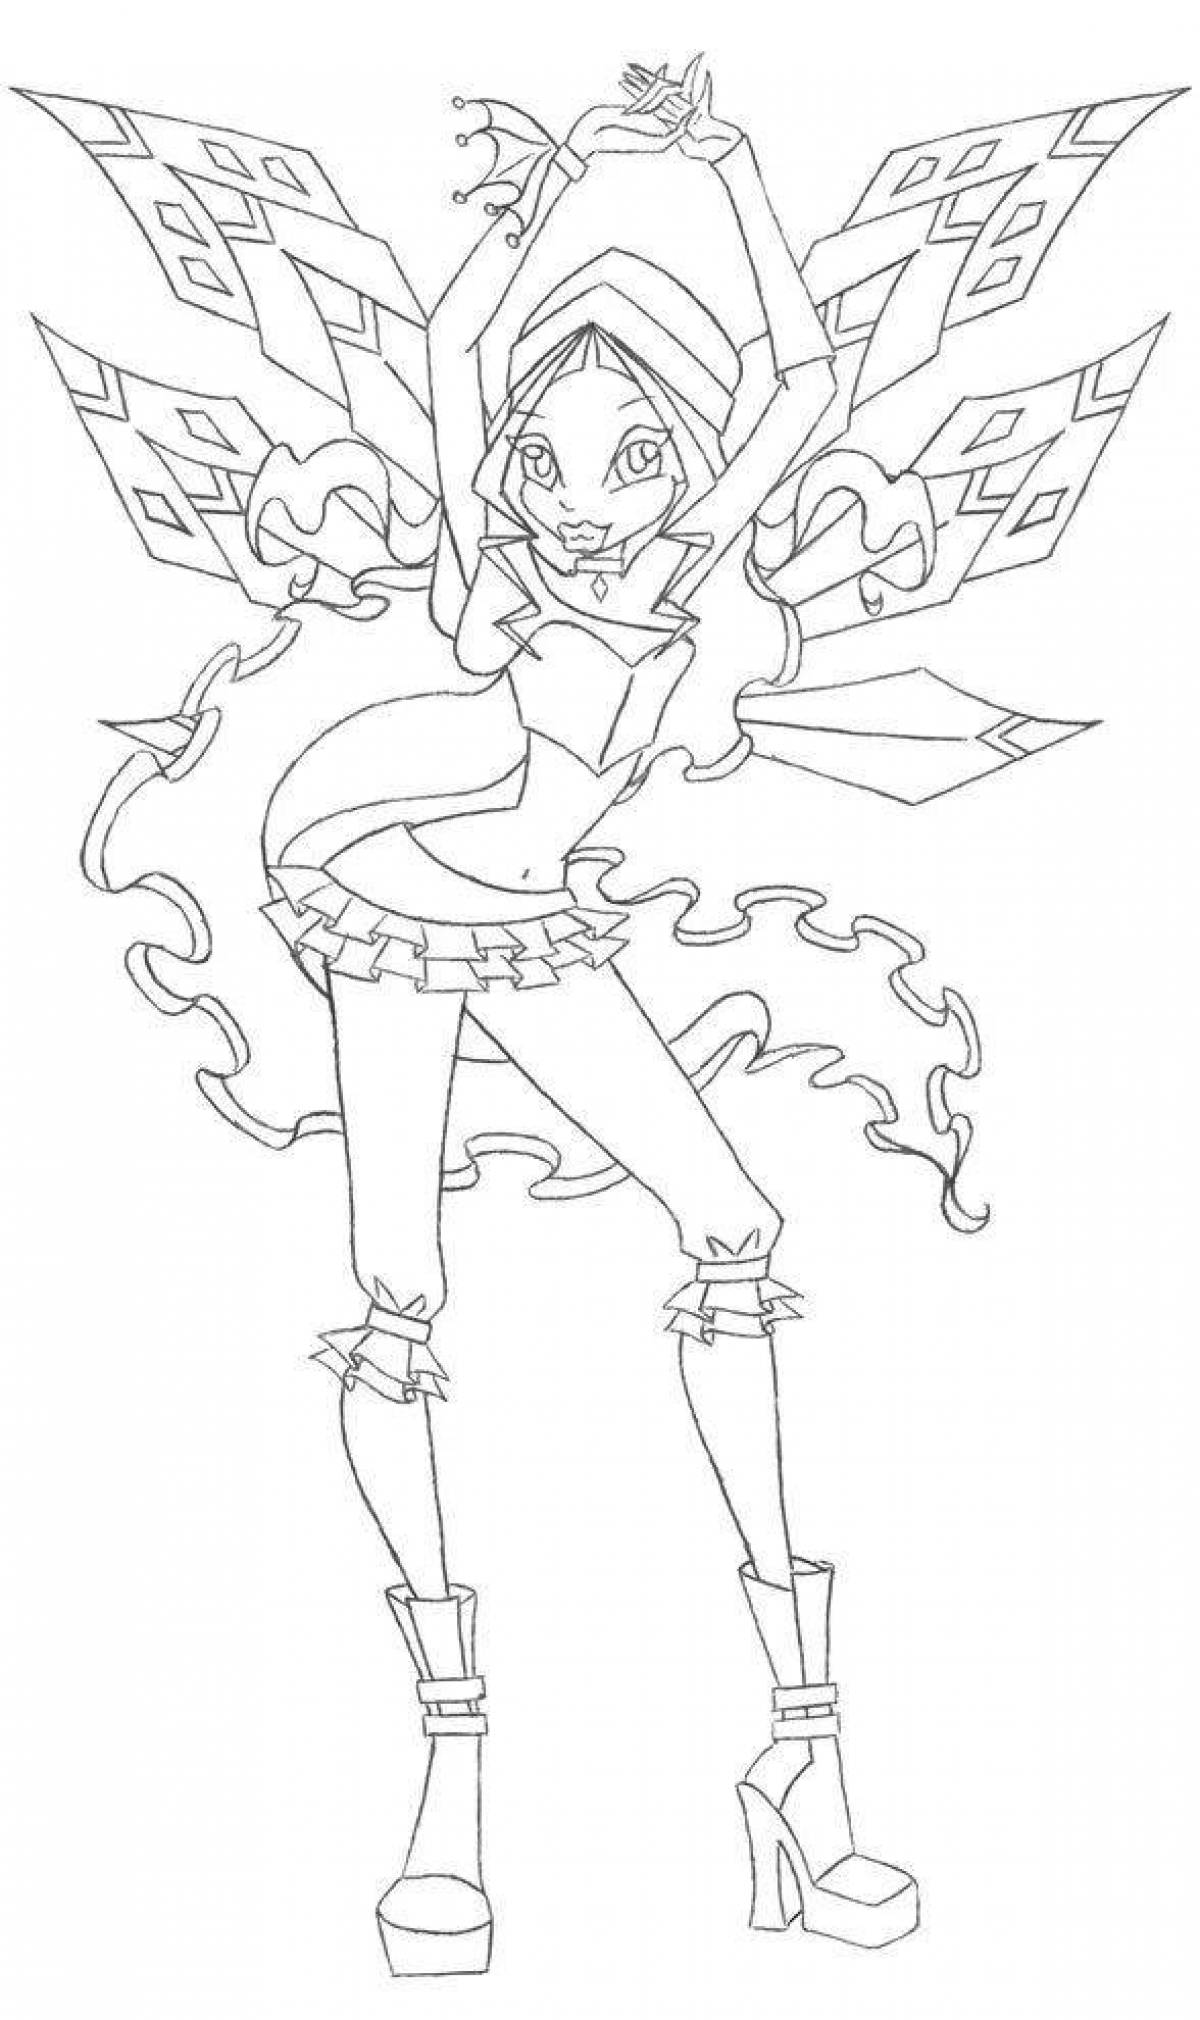 Charming Winx Layla Belivix coloring book